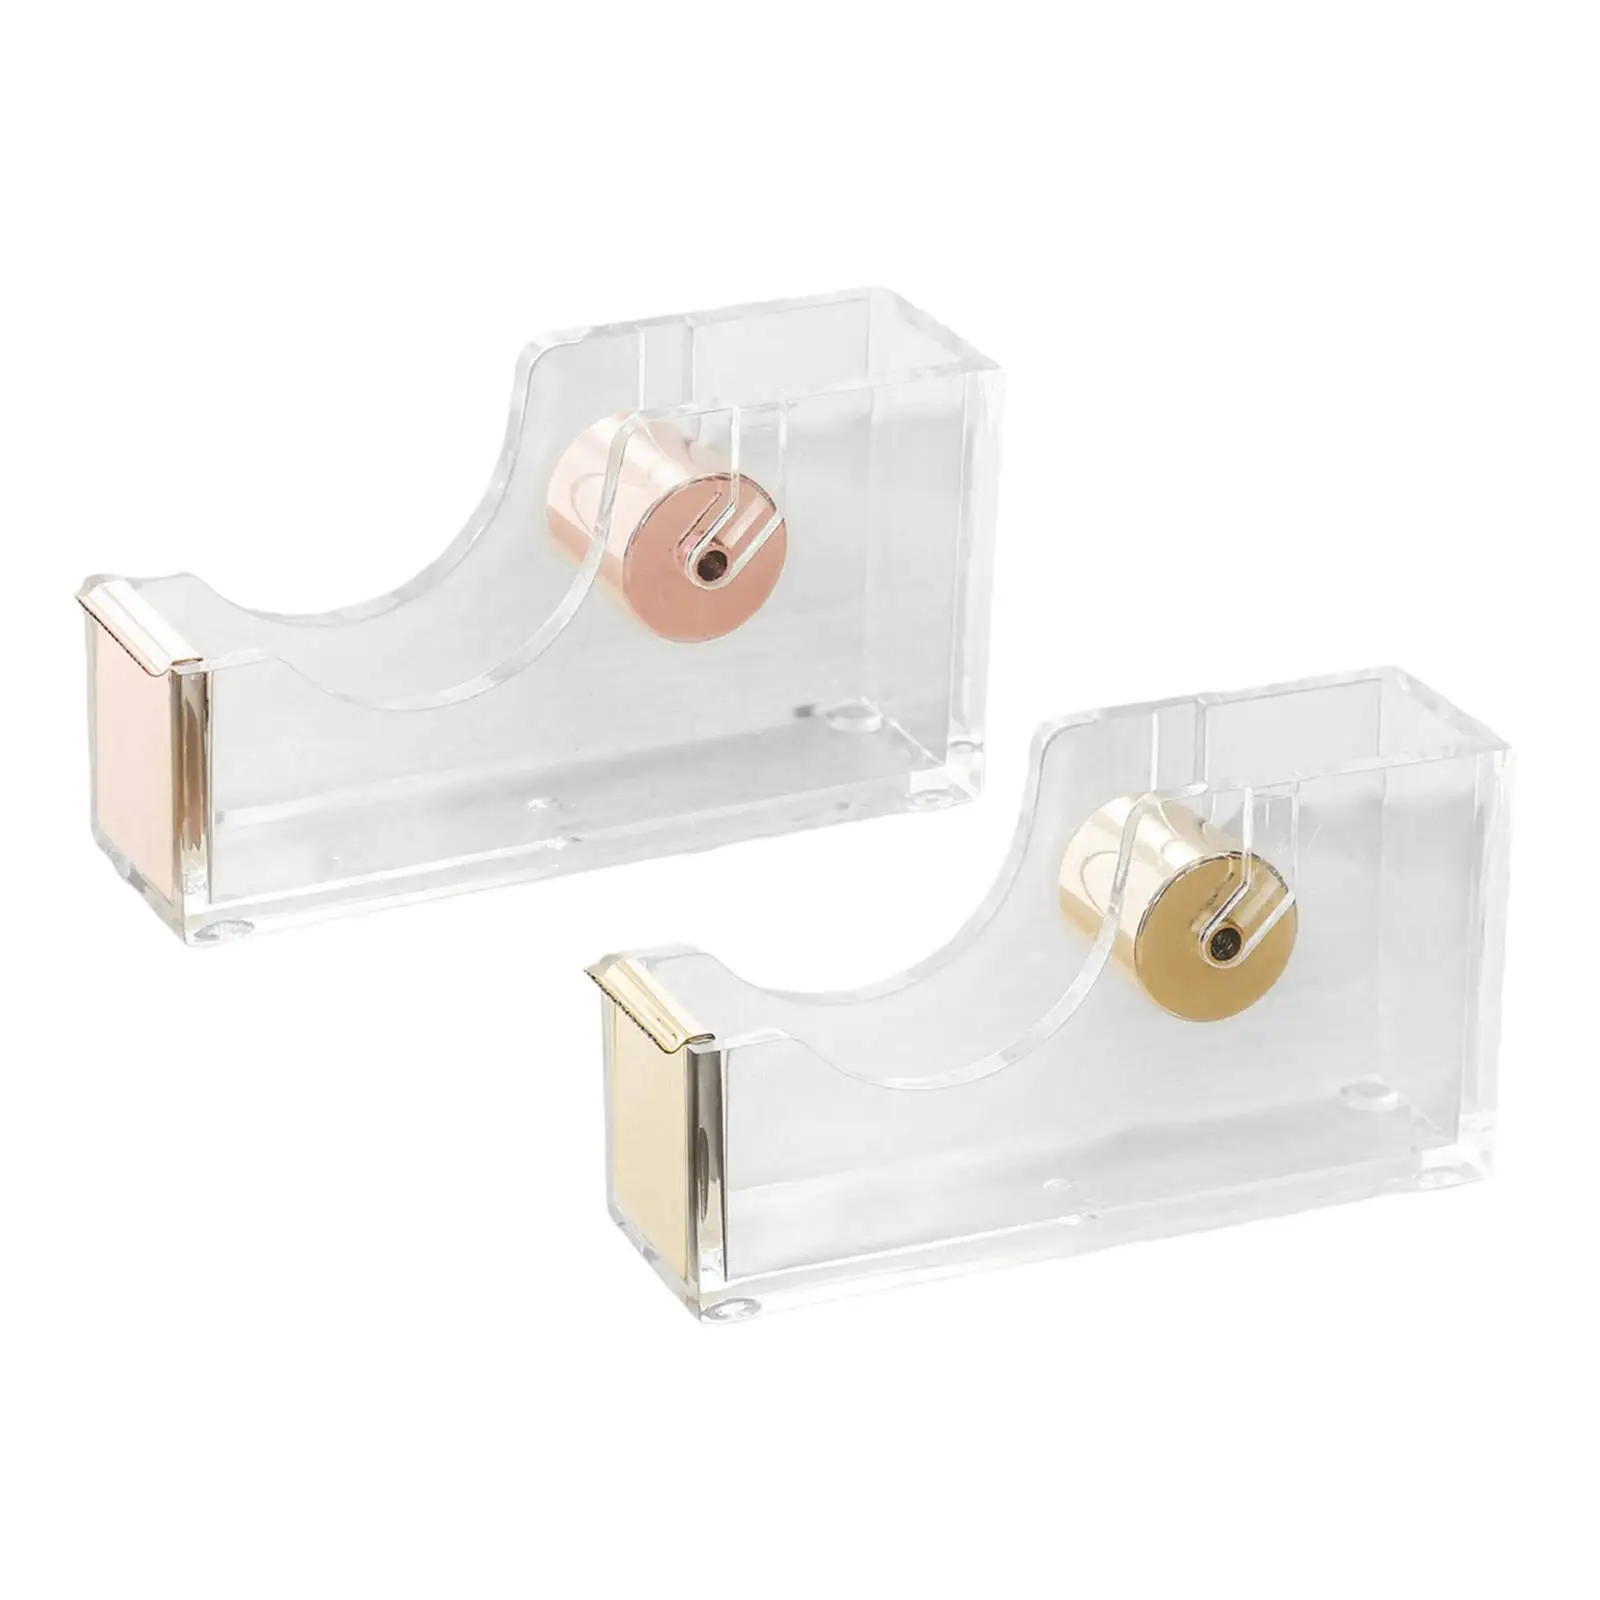 1Pcs Tape Dispenser Acrylic Clear Accessory Portable Available Organization Elegant Stationery for Home School Desktop Office